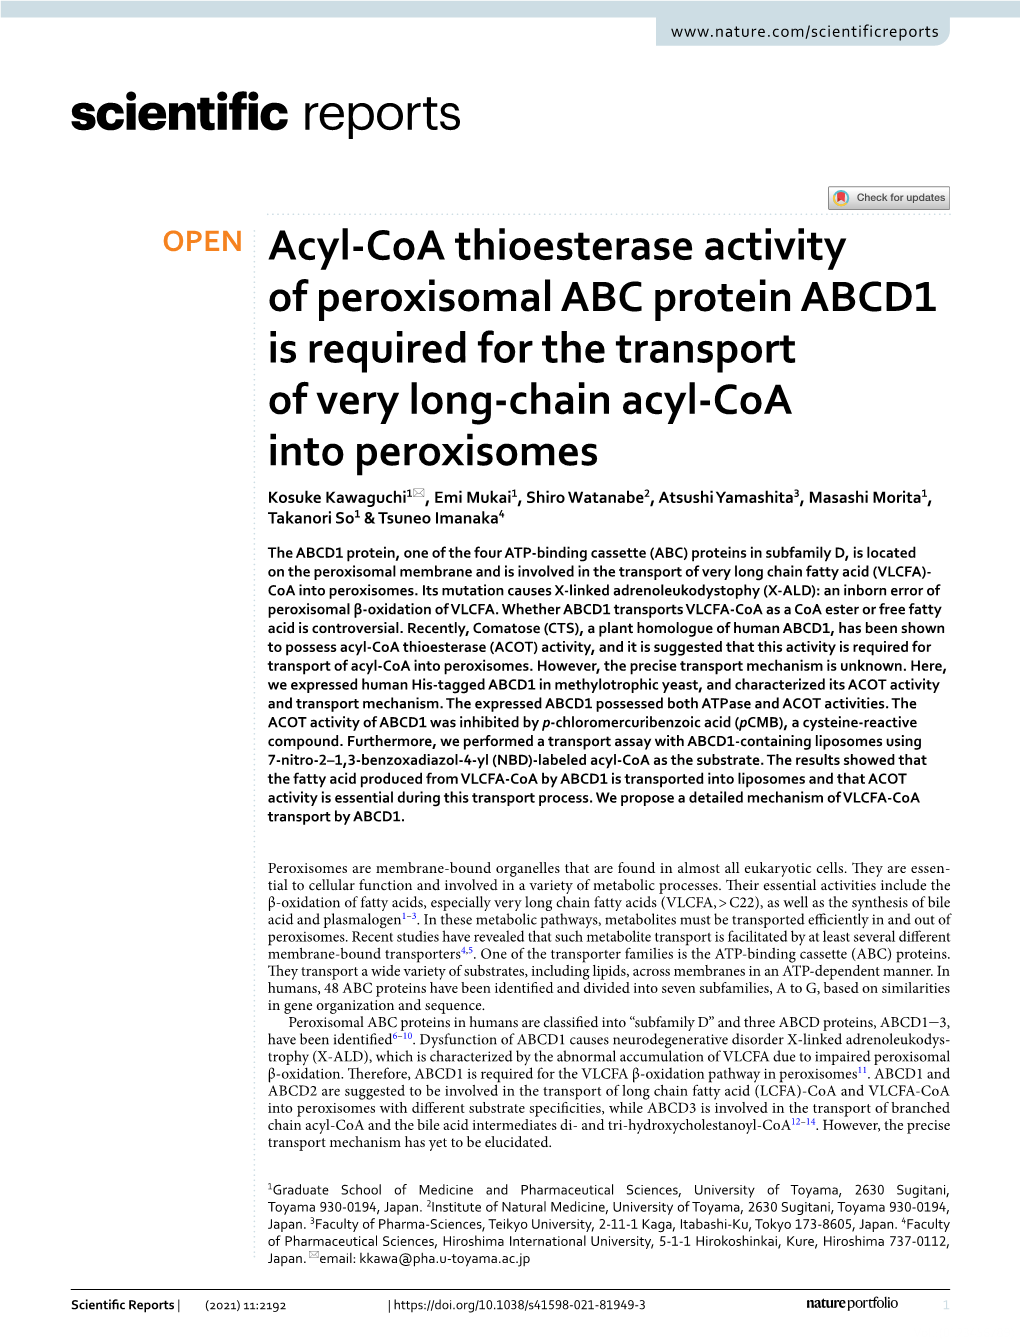 Acyl-Coa Thioesterase Activity of Peroxisomal ABC Protein ABCD1 Is